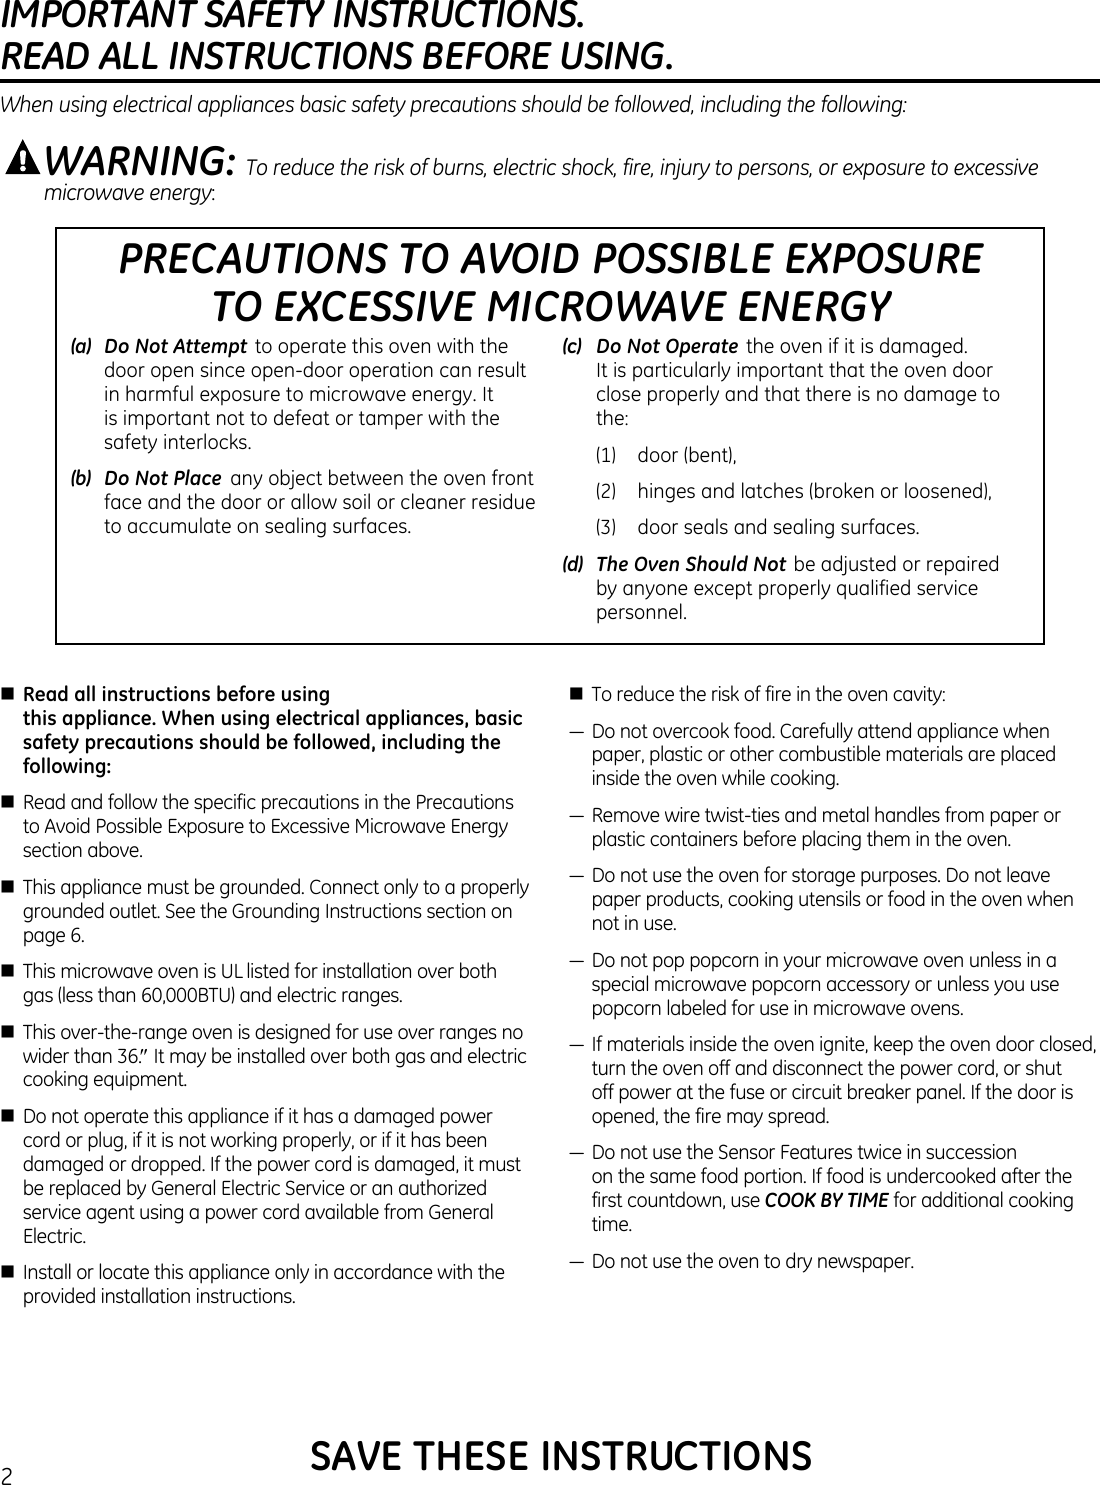 IMPORTANT SAFETY INSTRUCTIONS.  READ ALL INSTRUCTIONS BEFORE USING.2PRECAUTIONS TO AVOID POSSIBLE EXPOSURE  TO EXCESSIVE MICROWAVE ENERGY(a)   Do Not Attempt  to operate this oven with the door open since open-door operation can result in harmful exposure to microwave energy. It is important not to defeat or tamper with the safety interlocks.(b)   Do Not Place  any object between the oven front face and the door or allow soil or cleaner residue to accumulate on sealing surfaces.(c)   Do Not Operate  the oven if it is damaged. It is particularly important that the oven door close properly and that there is no damage to the:  (1)   door (bent),  (2)    hinges and latches (broken or loosened),  (3)   door seals and sealing surfaces.(d)   The Oven Should Not  be adjusted or repaired by anyone except properly qualified service personnel.WARNING: To reduce the risk of burns, electric shock, fire, injury to persons, or exposure to excessive microwave energy:When using electrical appliances basic safety precautions should be followed, including the following:SAVE THESE INSTRUCTIONSnRead all instructions before using this appliance. When using electrical appliances, basic safety precautions should be followed, including the following:n Read and follow the specific precautions in the Precautions to Avoid Possible Exposure to Excessive Microwave Energy section above.n This appliance must be grounded. Connect only to a properly grounded outlet. See the Grounding Instructions section on page 6.n This microwave oven is UL listed for installation over both gas (less than 60,000BTU) and electric ranges.n This over-the-range oven is designed for use over ranges no wider than 36.″ It may be installed over both gas and electric cooking equipment.n Do not operate this appliance if it has a damaged power cord or plug, if it is not working properly, or if it has been damaged or dropped. If the power cord is damaged, it must be replaced by General Electric Service or an authorized service agent using a power cord available from General Electric.n Install or locate this appliance only in accordance with the provided installation instructions.n To reduce the risk of fire in the oven cavity:—Donotovercookfood.Carefullyattendappliancewhenpaper, plastic or other combustible materials are placed inside the oven while cooking.—Removewiretwist-tiesandmetalhandlesfrompaperorplastic containers before placing them in the oven.—Donotusetheovenforstoragepurposes.Donotleavepaper products, cooking utensils or food in the oven when not in use.—Donotpoppopcorninyourmicrowaveovenunlessinaspecial microwave popcorn accessory or unless you use popcorn labeled for use in microwave ovens.—Ifmaterialsinsidetheovenignite,keeptheovendoorclosed,turn the oven off and disconnect the power cord, or shut off power at the fuse or circuit breaker panel. If the door is opened, the fire may spread.—DonotusetheSensorFeaturestwiceinsuccession on the same food portion. If food is undercooked after the first countdown, use COOK BY TIME for additional cooking time.—Donotusetheoventodrynewspaper.